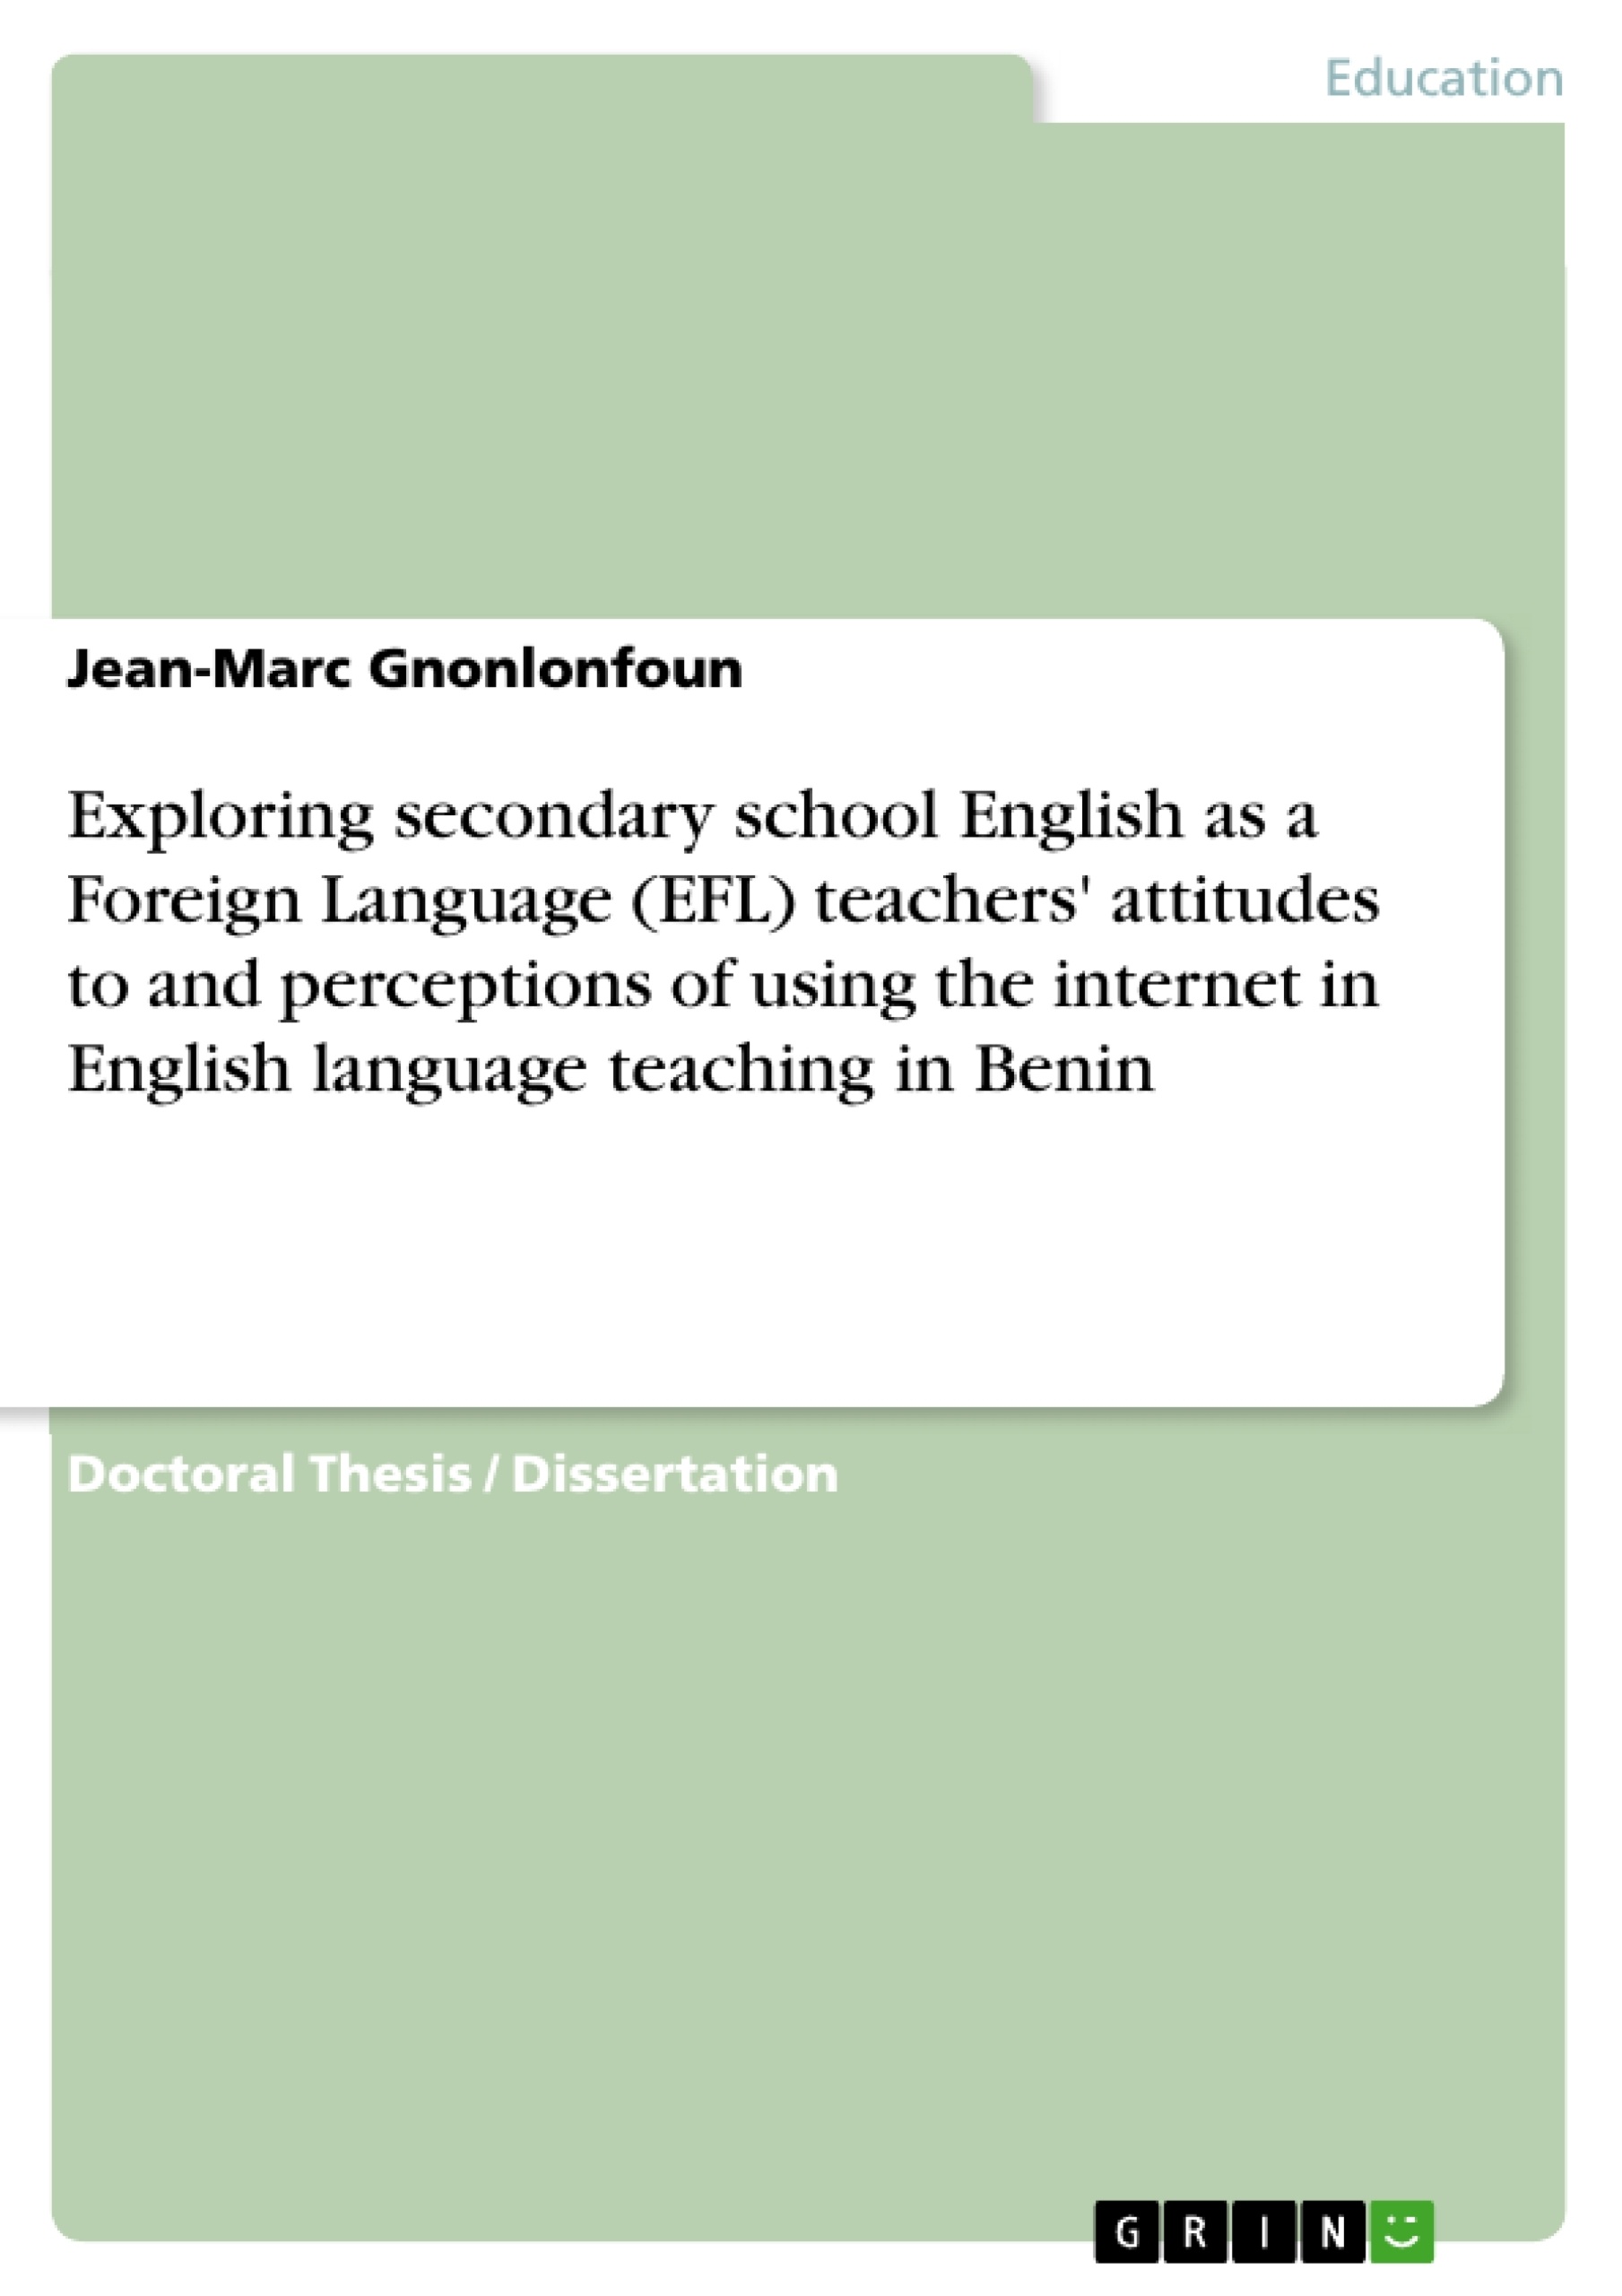 in　language　Foreign　Language　school　using　teachers'　English　teaching　(EFL)　as　a　of　in　the　attitudes　to　internet　and　perceptions　English　Exploring　GRIN　secondary　Benin